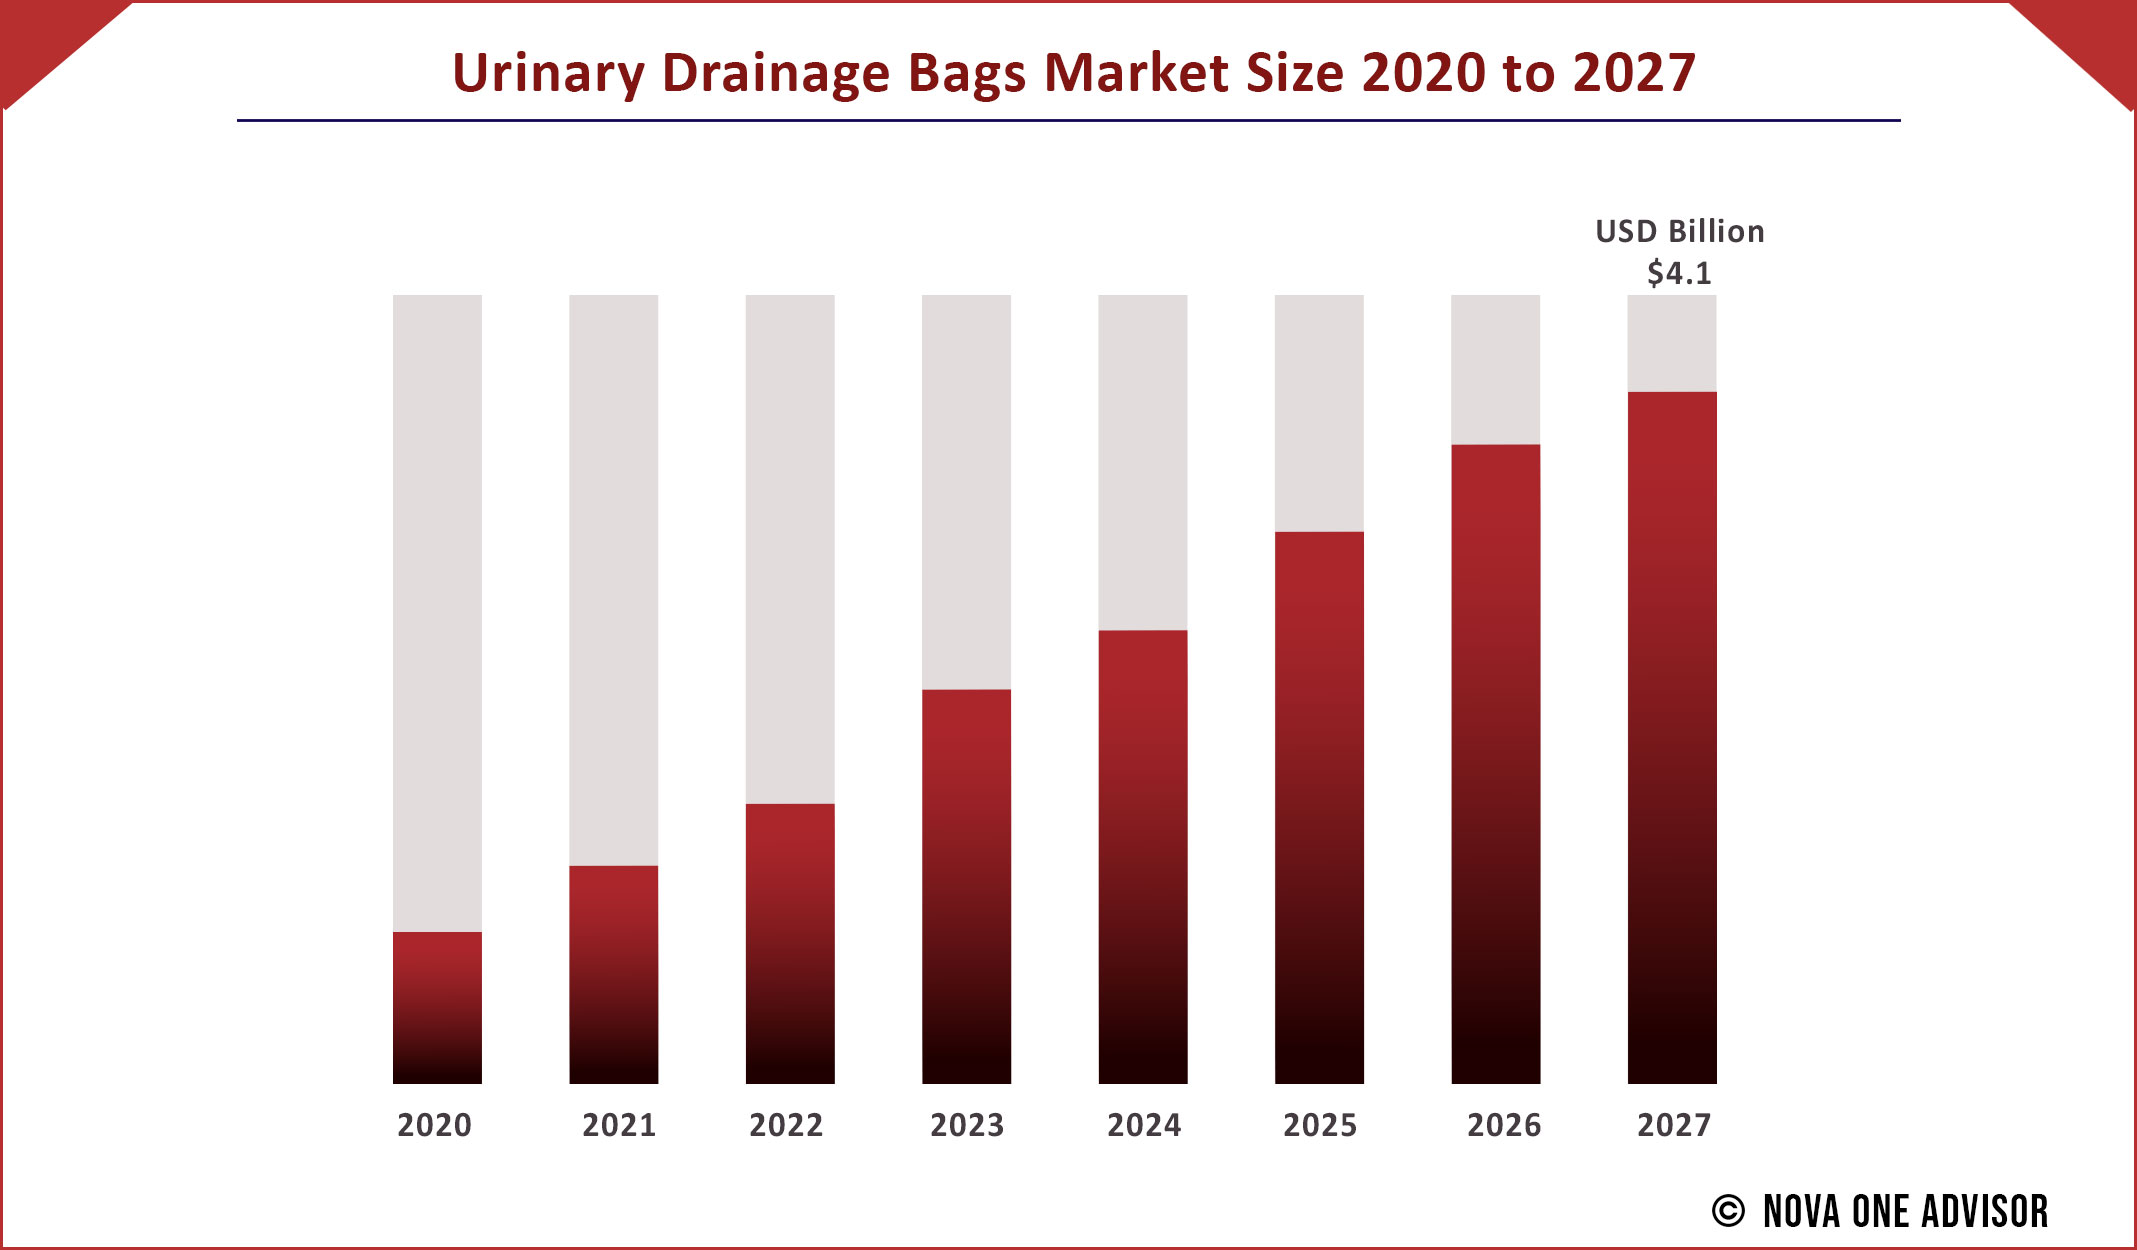 Urinary Drainage Bags Market Size 2020 to 2027